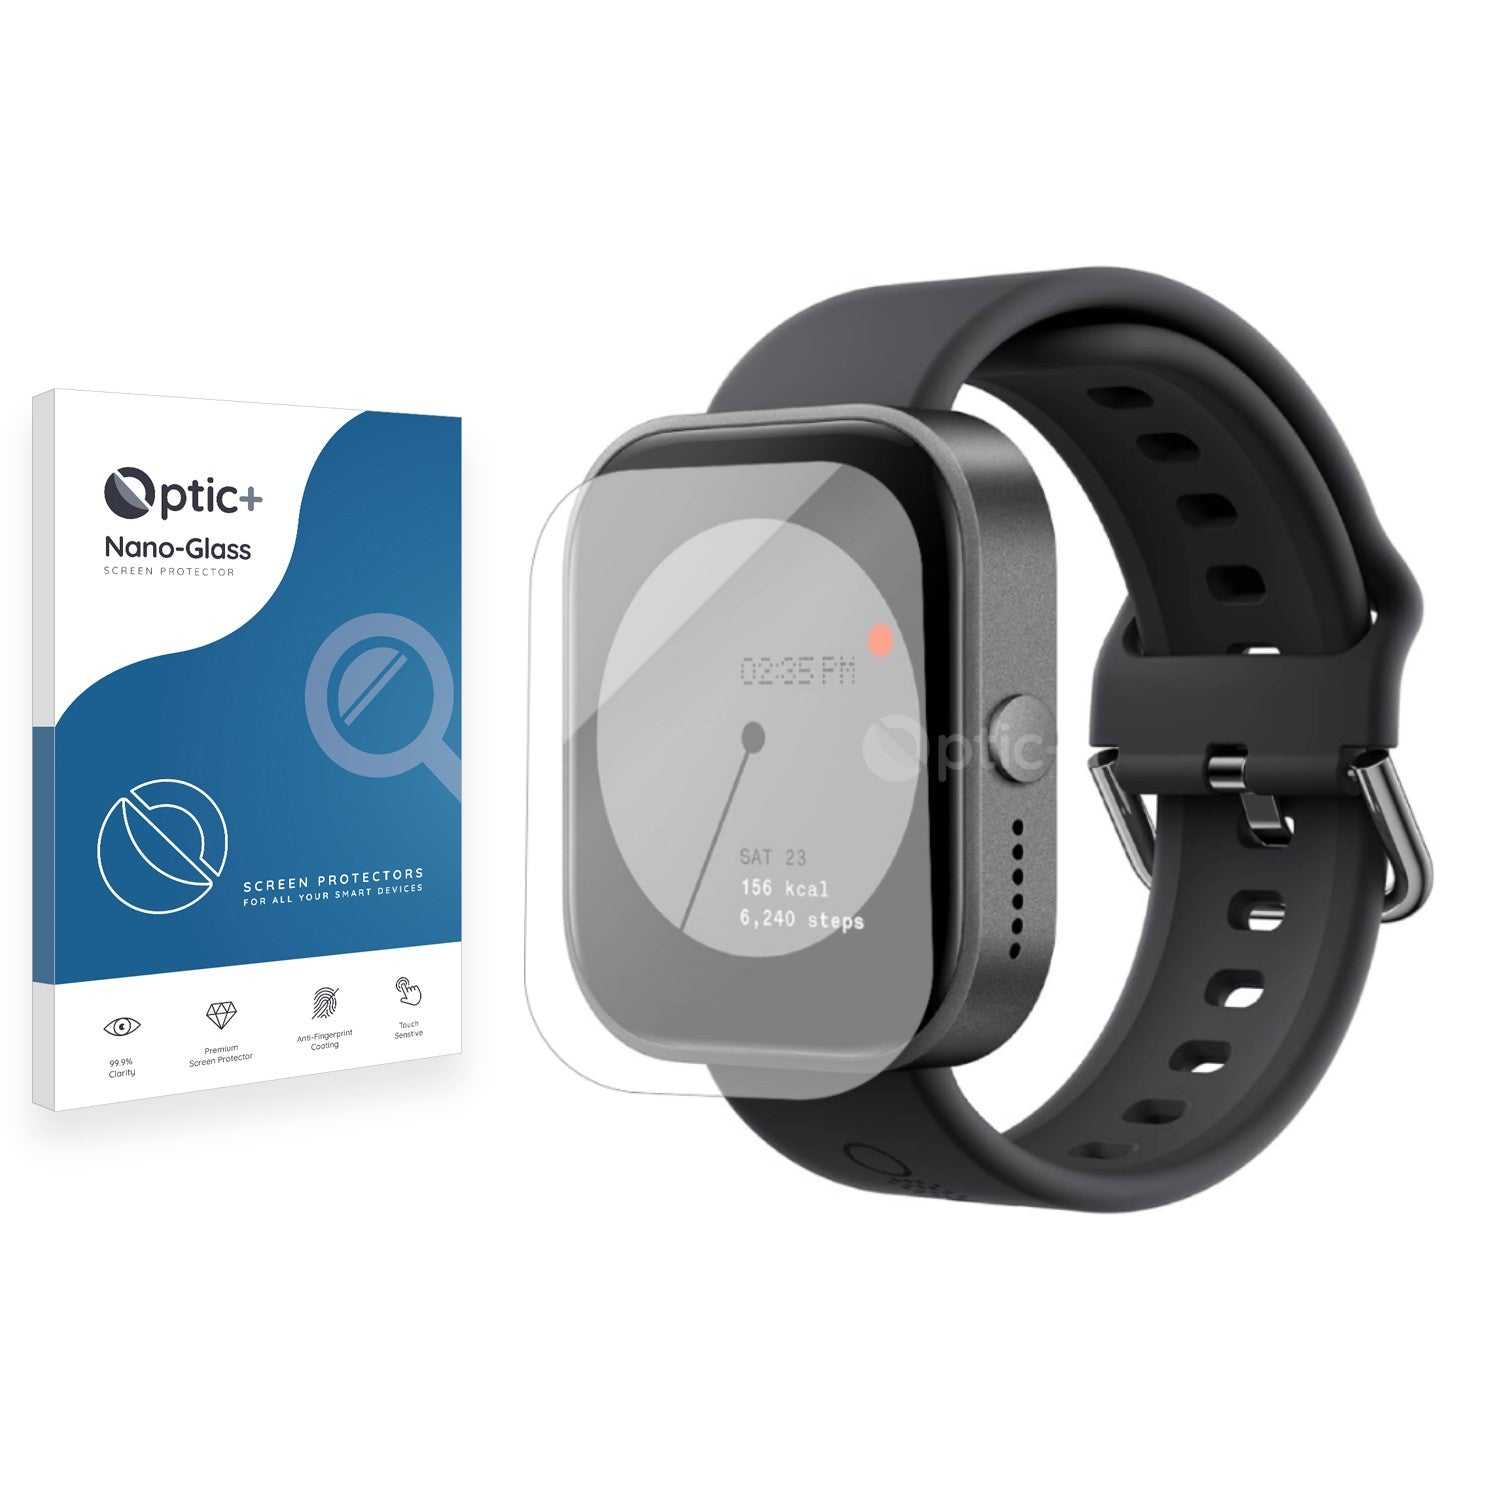 ScreenShield, Optic+ Nano Glass Screen Protector for Nothing CMF Watch Pro